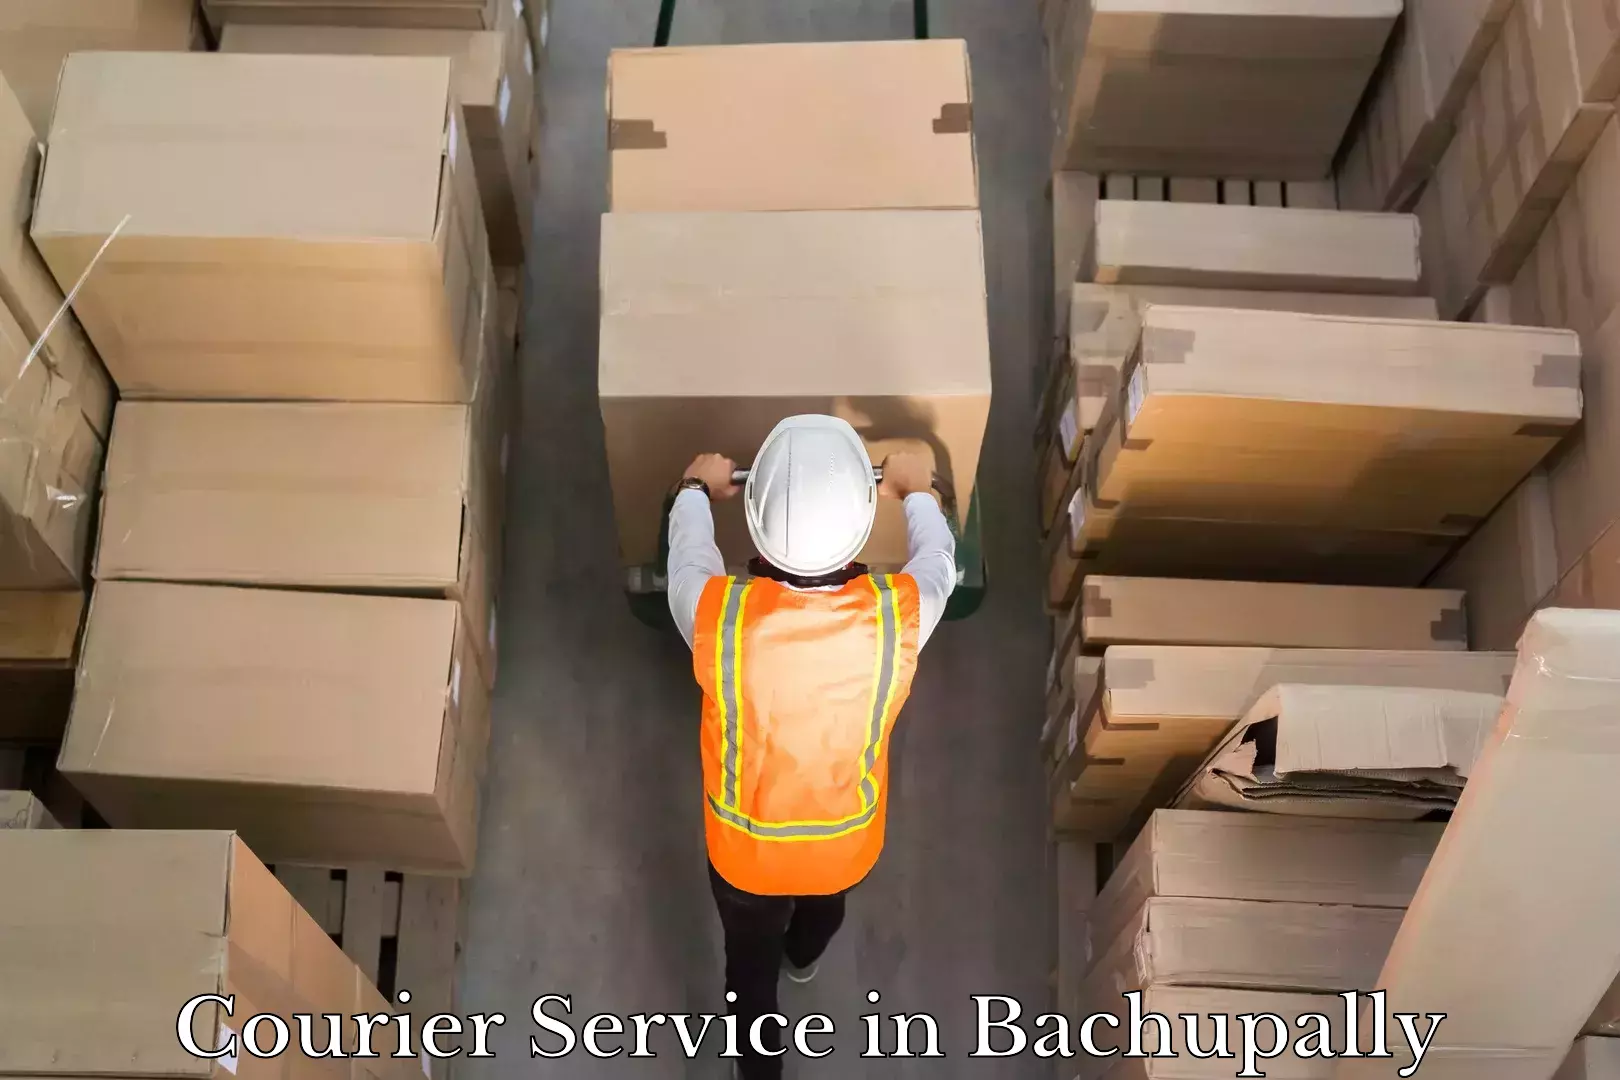 Next-generation courier services in Bachupally